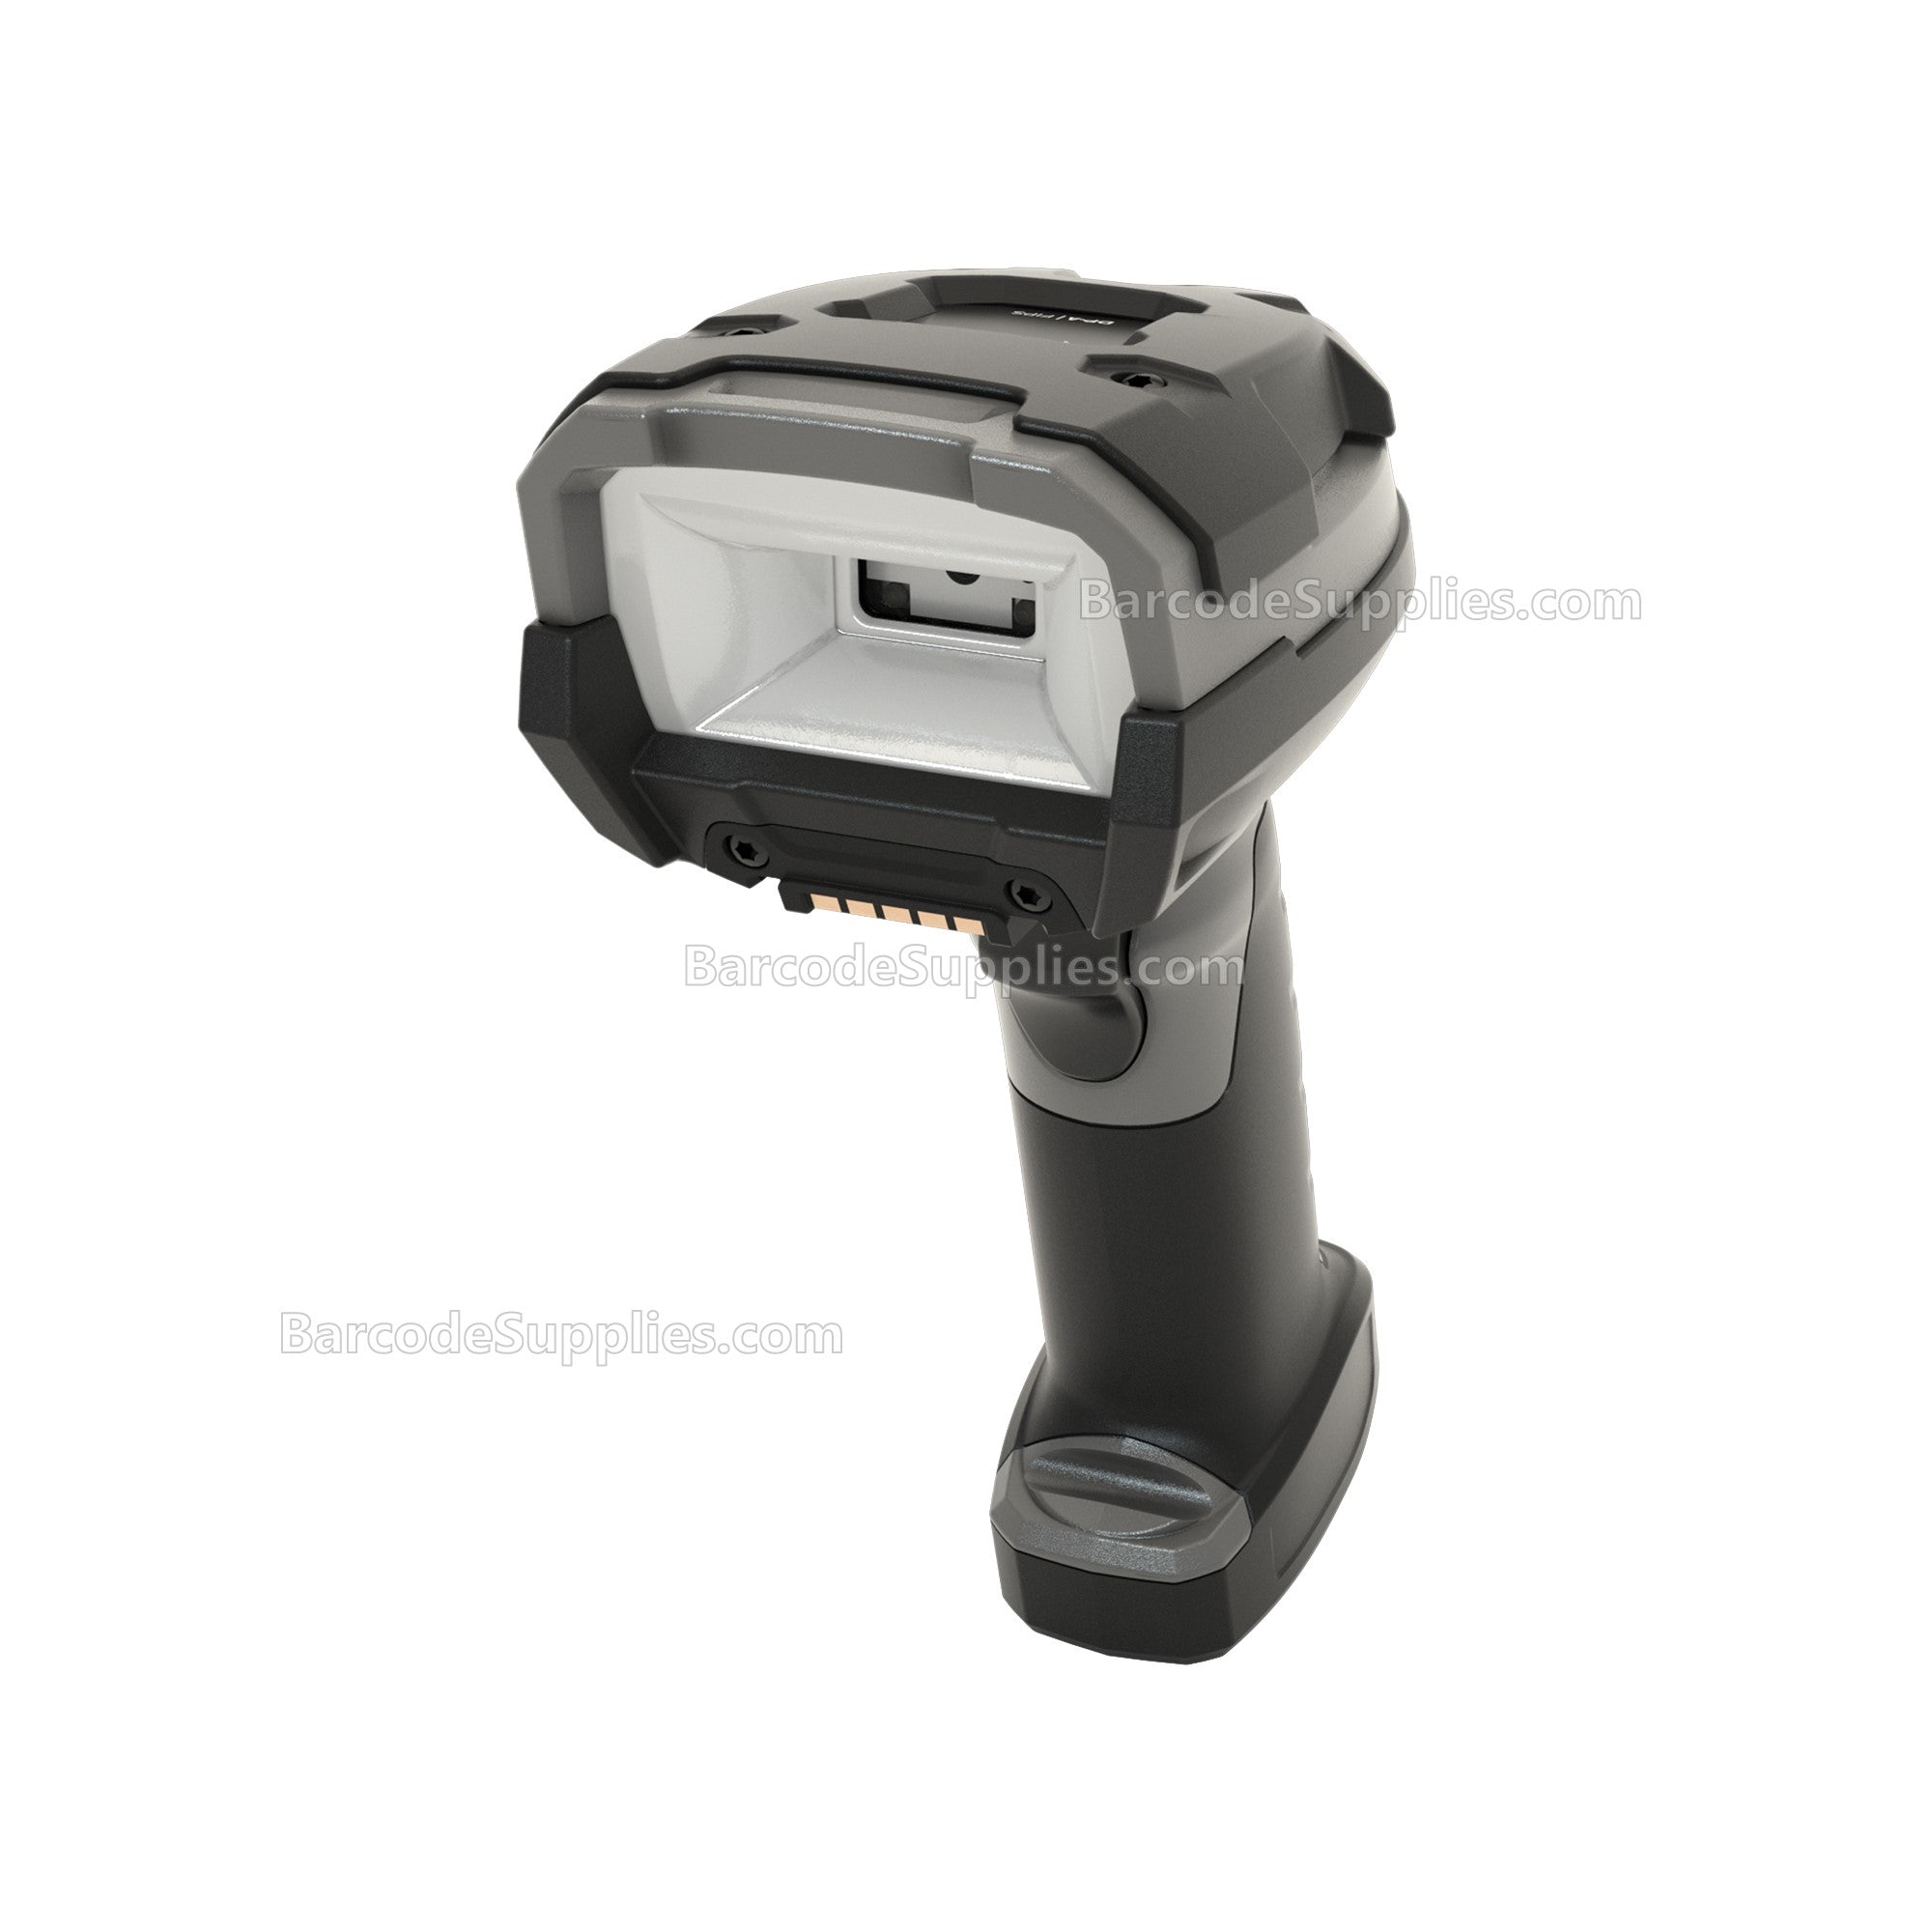 Zebra DS3678-DPA (FOR AUTOMATION) CORDLESS ROCKWELL INDUSTRIAL ETHERNET KIT: DS3678-DPAF002VZWW SCANNER, CBA-RF5-S07ZAR SERIAL CABLE, STB3678-C100F3WW CRADLE, EA3600-R1CP-00 ETHERNET ADAPTER (ETHERNET/IP, MODBUS TCP & TCP/IP PROTOCOLS)